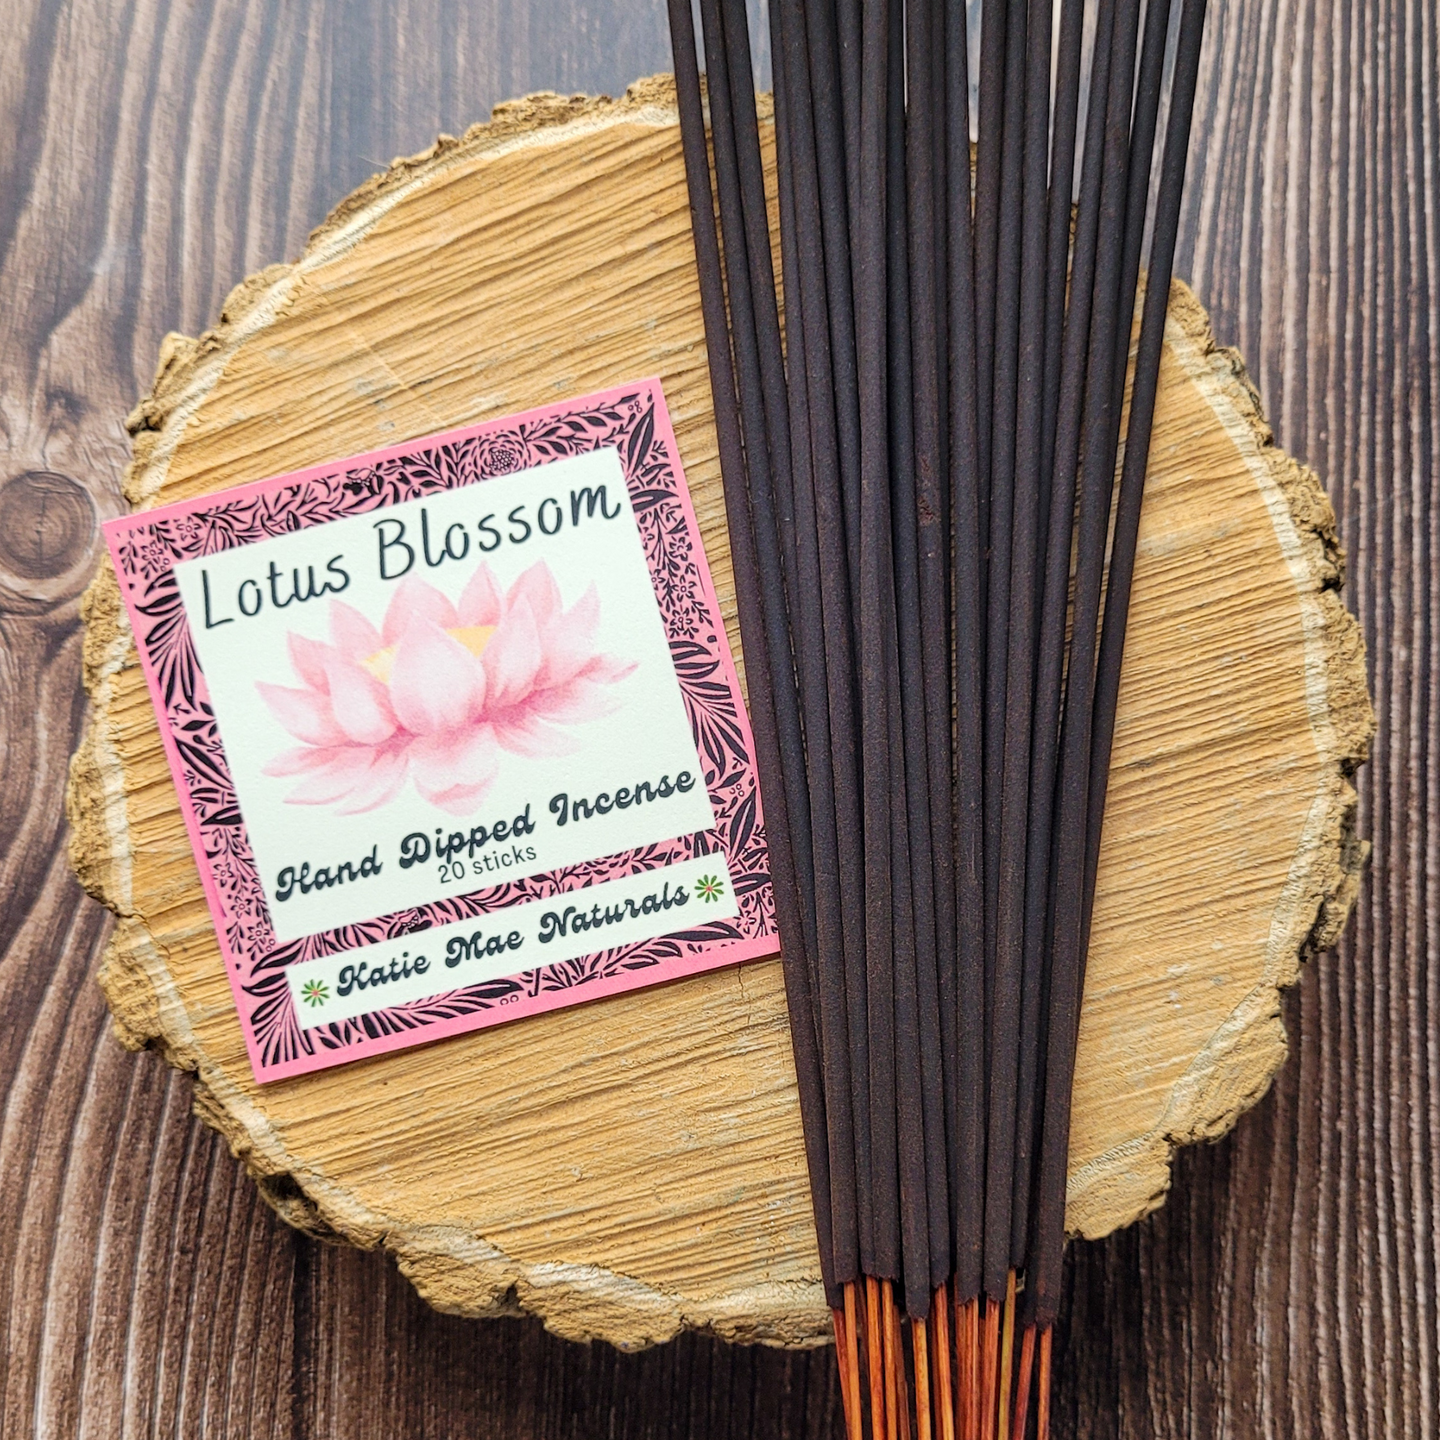 Lotus Blossom Hand Dipped Incense Sticks - 20 pack